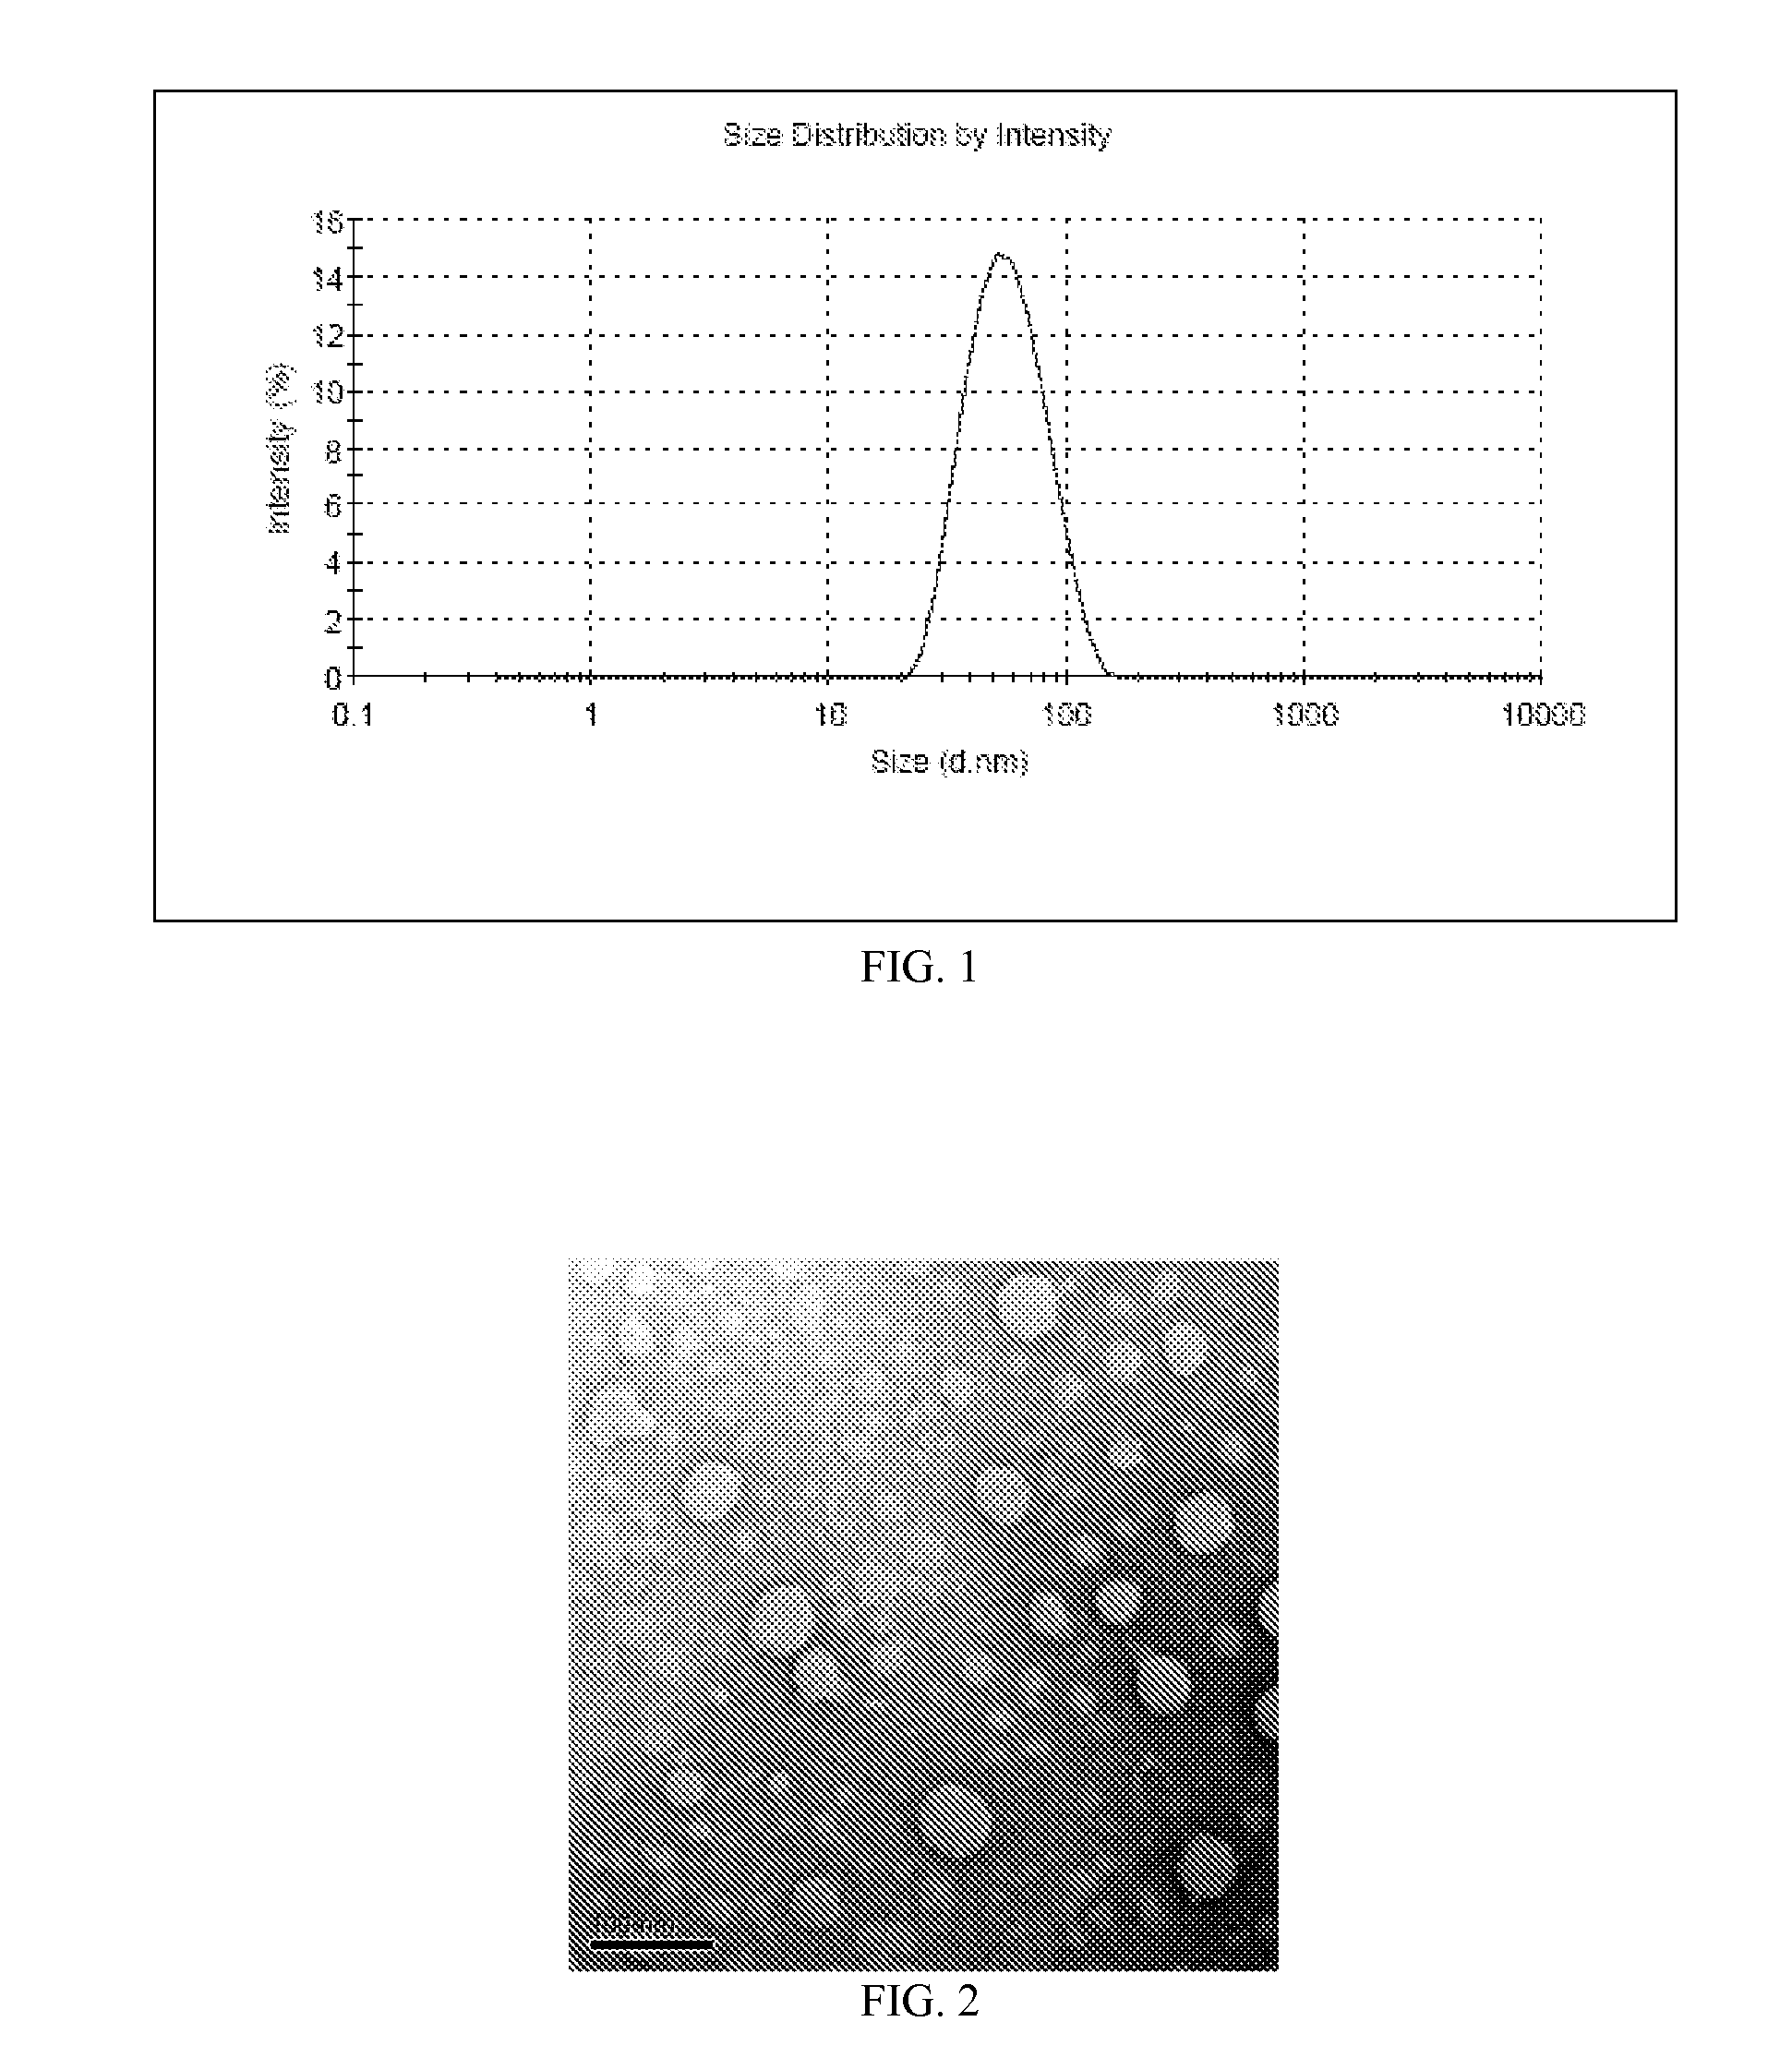 Nano-Emulsion Injection of Vinca Alkaloids and the Preparation Method Thereof